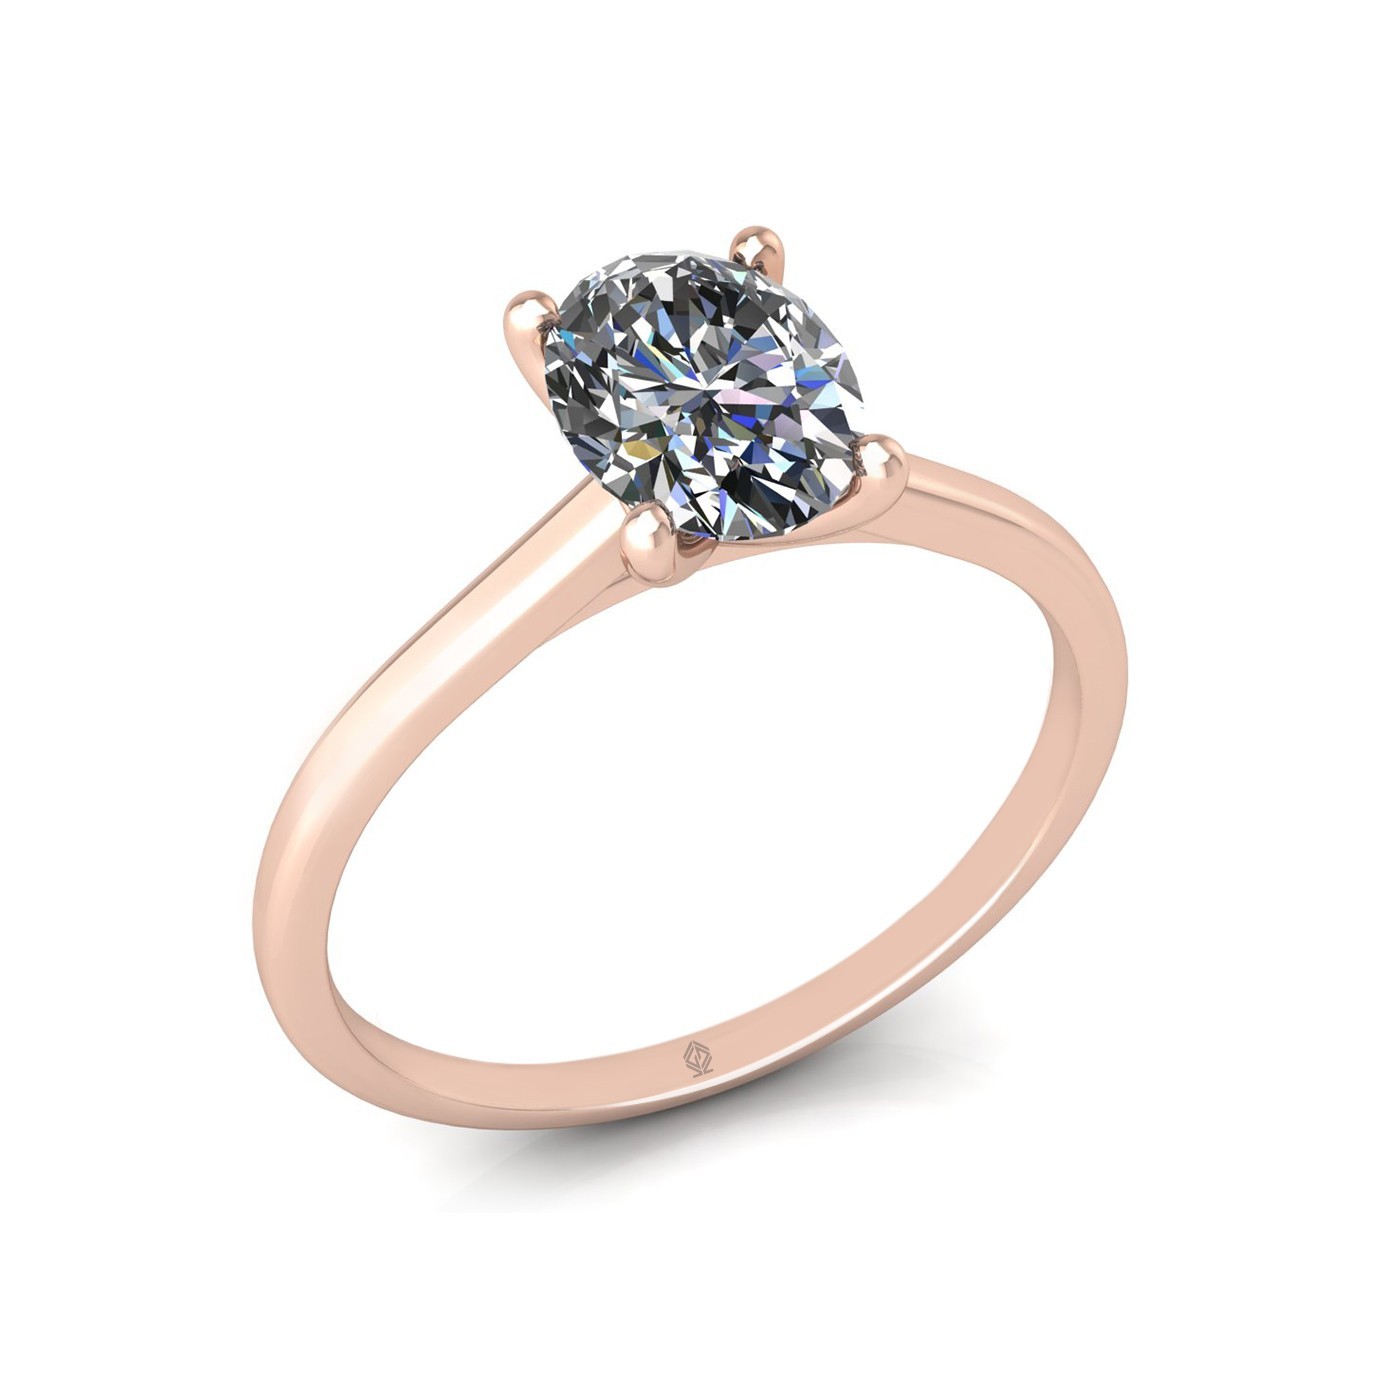 18k rose gold  1,20 ct 4 prongs solitaire oval cut diamond engagement ring with whisper thin band